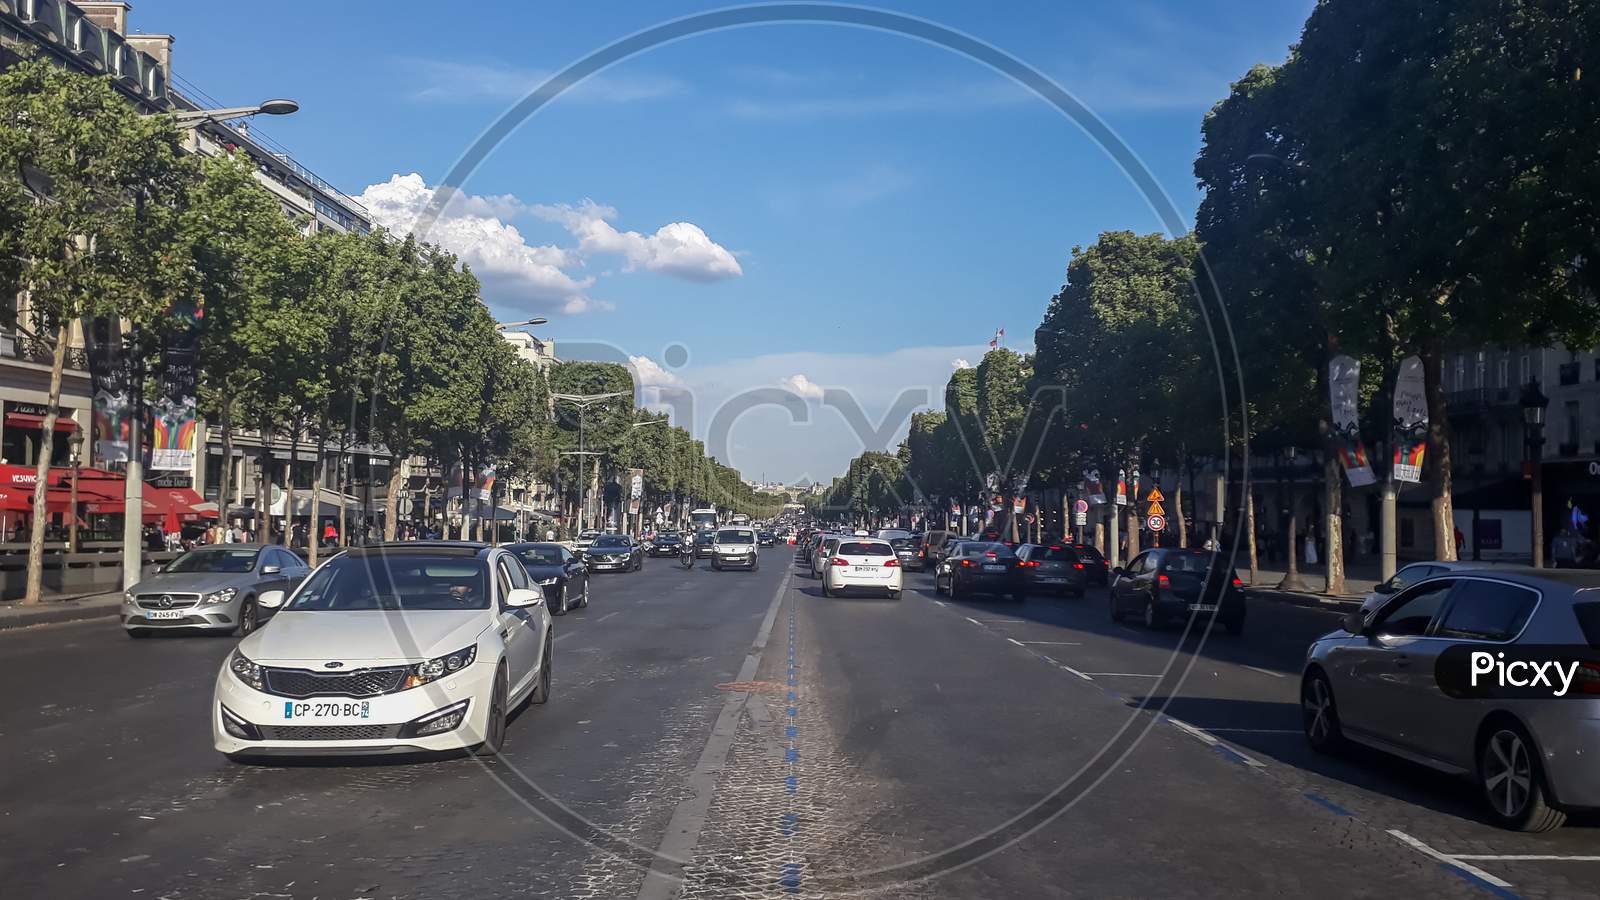 Paris, Frence- July 4 2018: City Street View